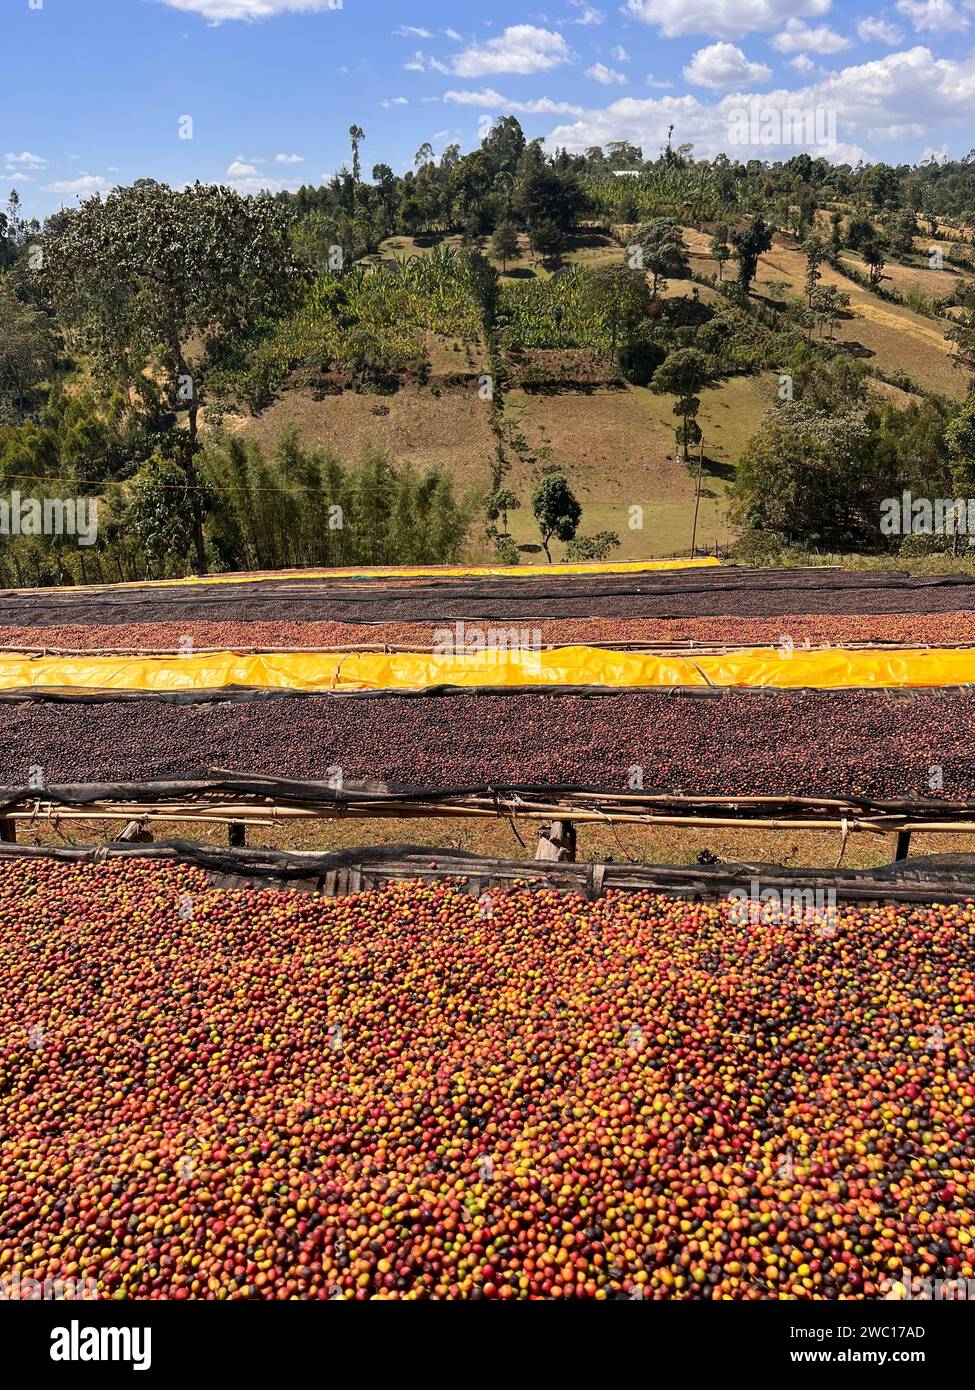 Coffee cherries drying in the sun on plastic sheeting on bamboo shelves in the mountains of the Sidama region. Stock Photo